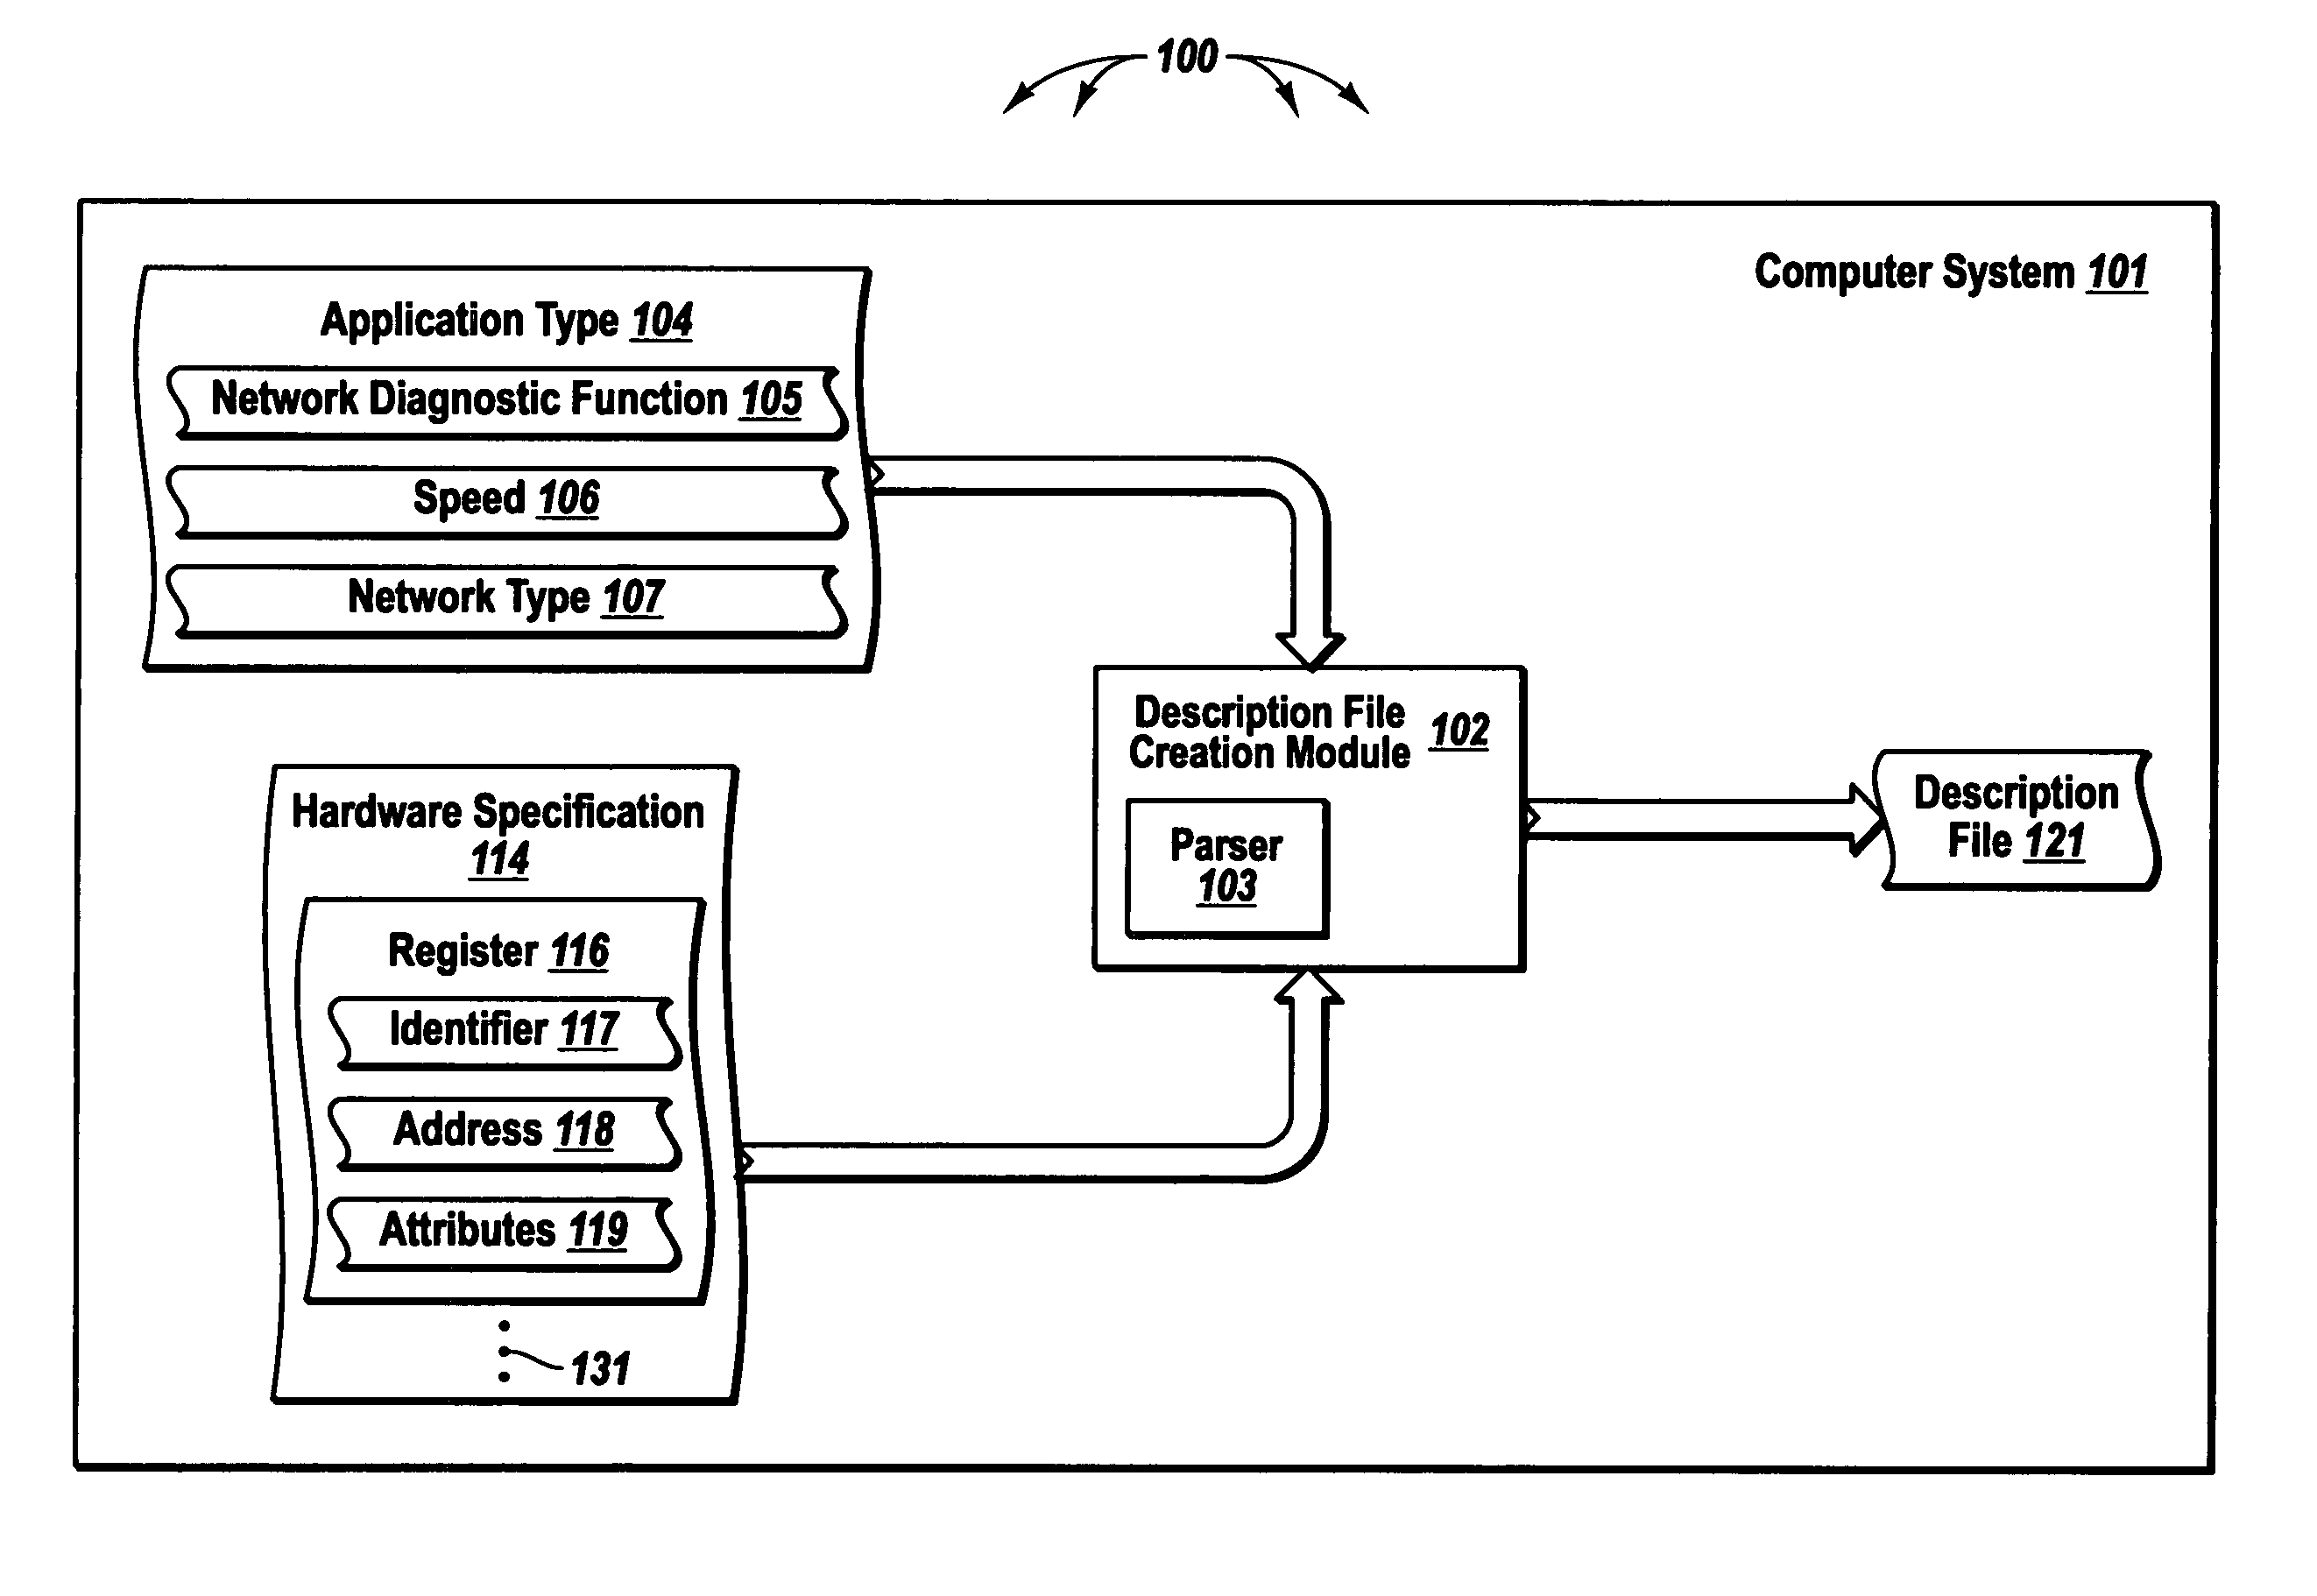 Creating description files used to configure components in a distributed system